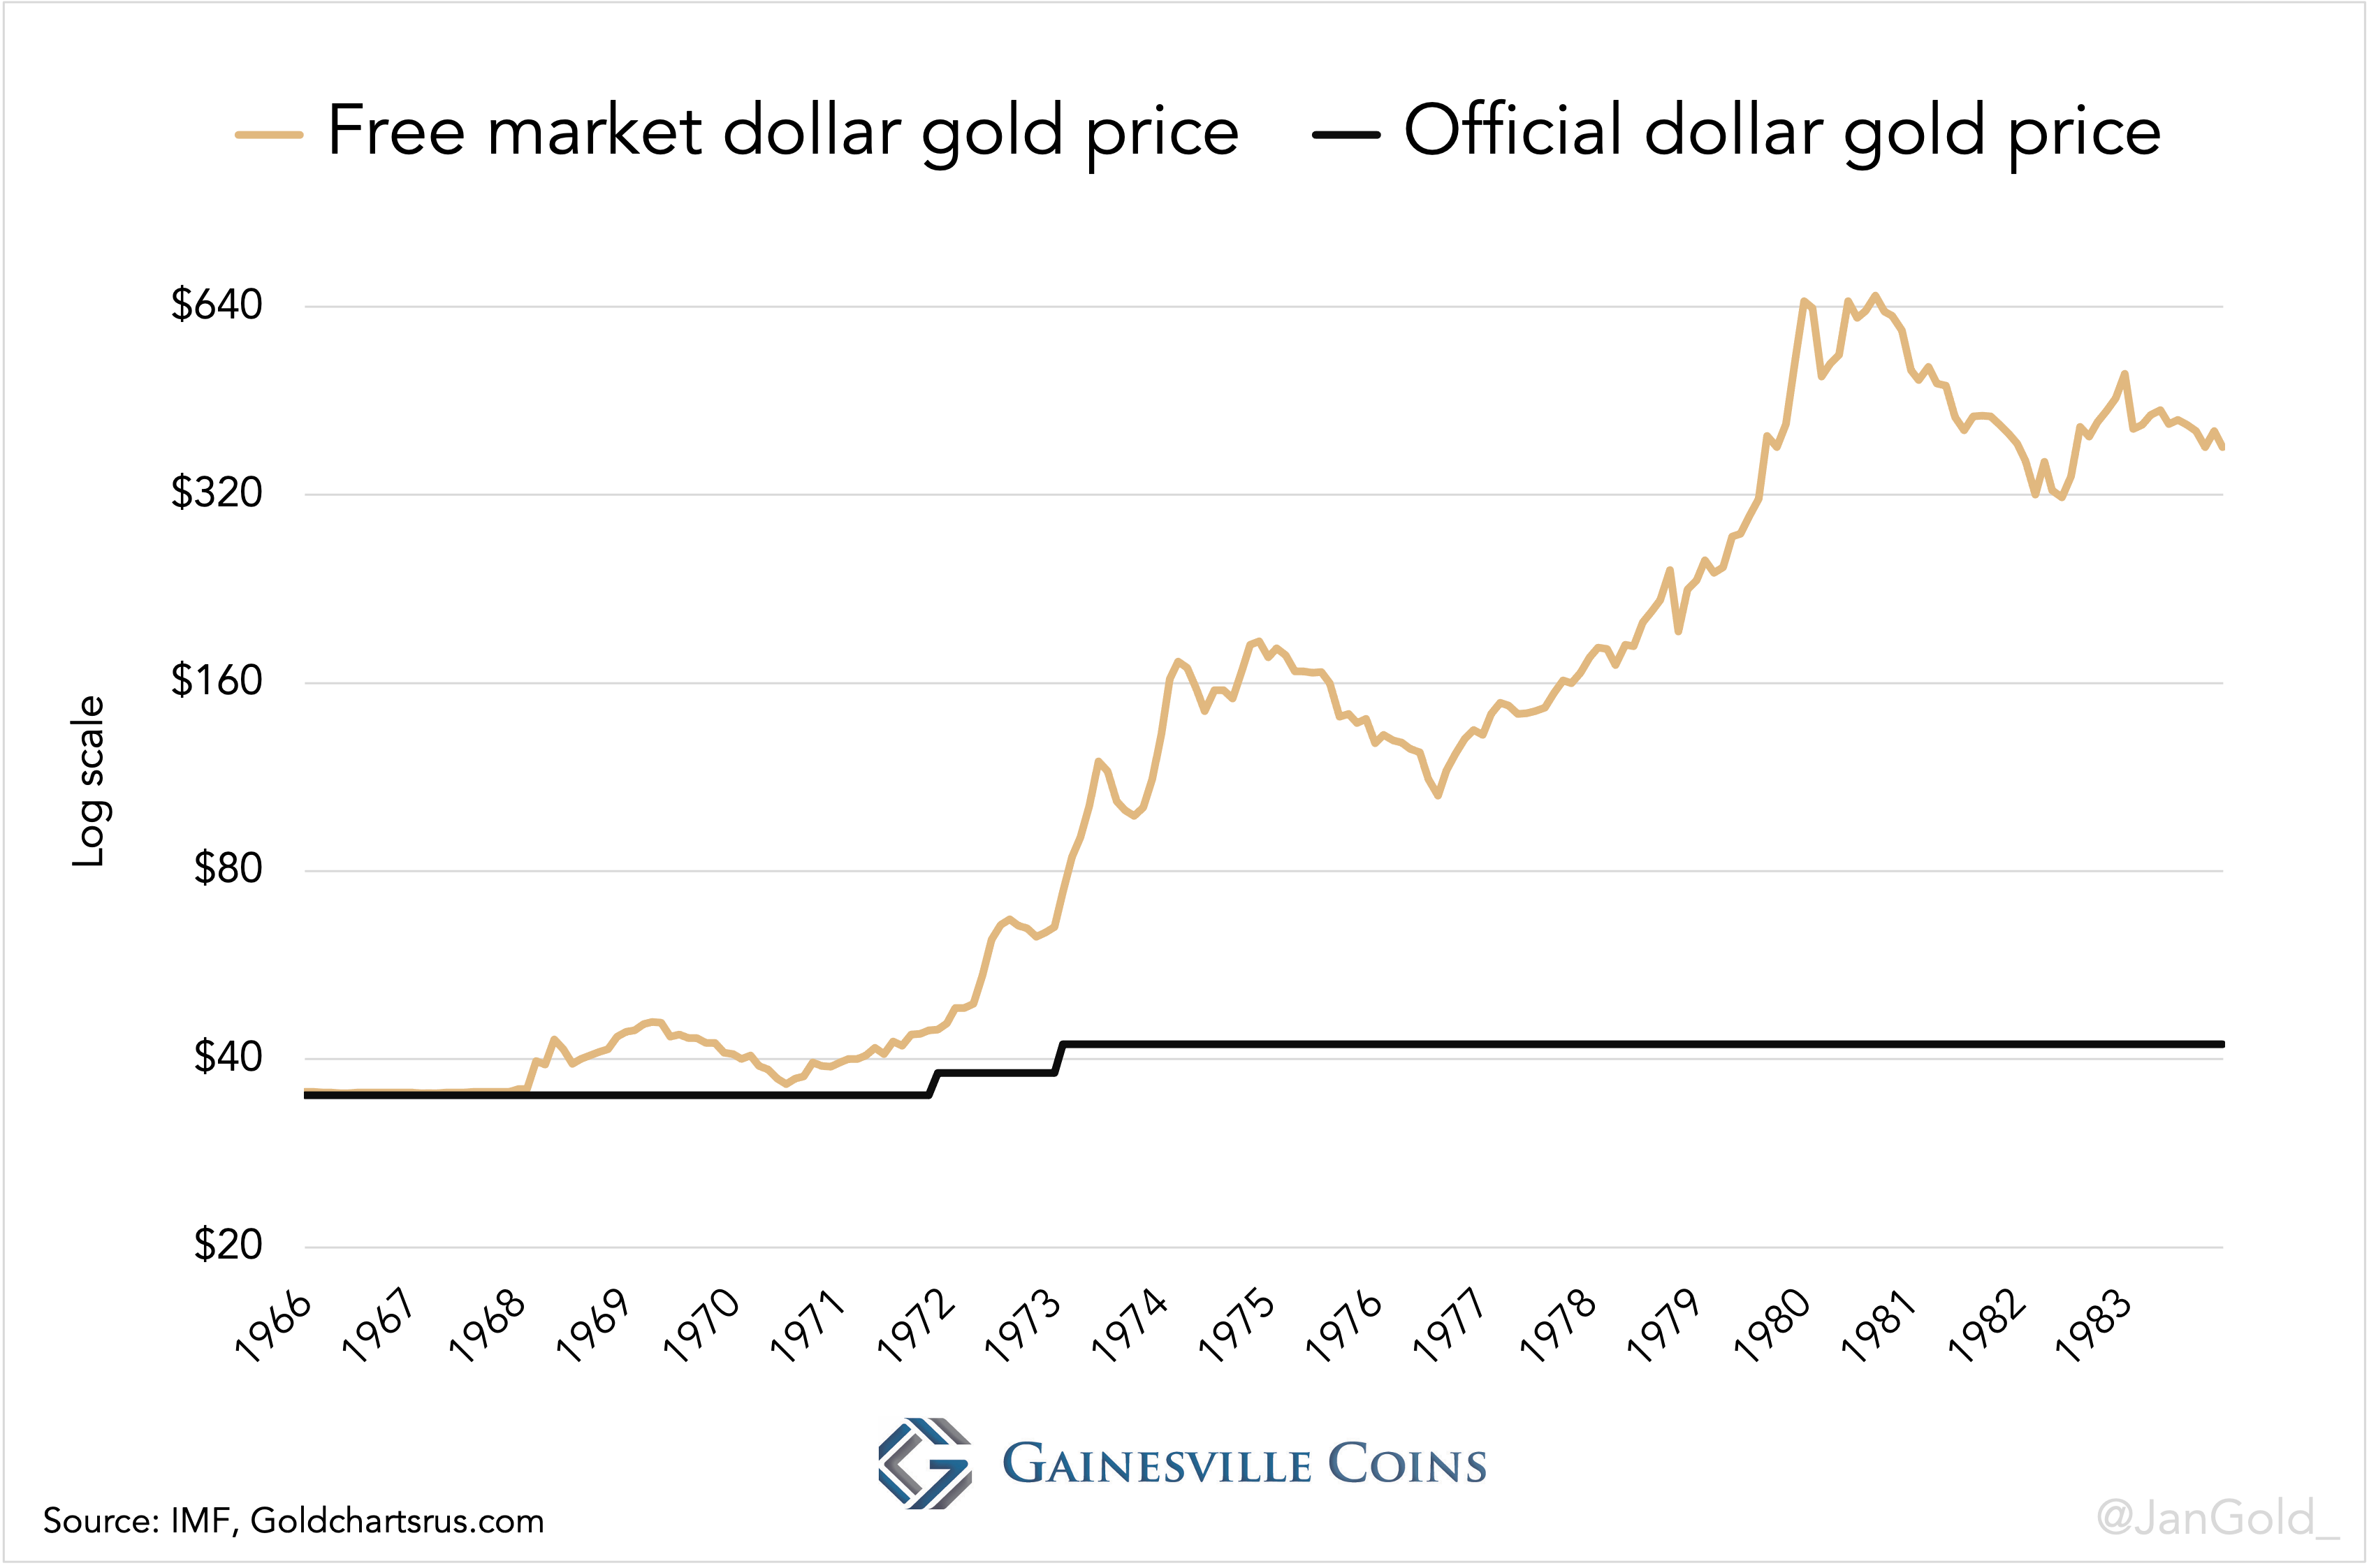 Free market and official gold prices 1970s